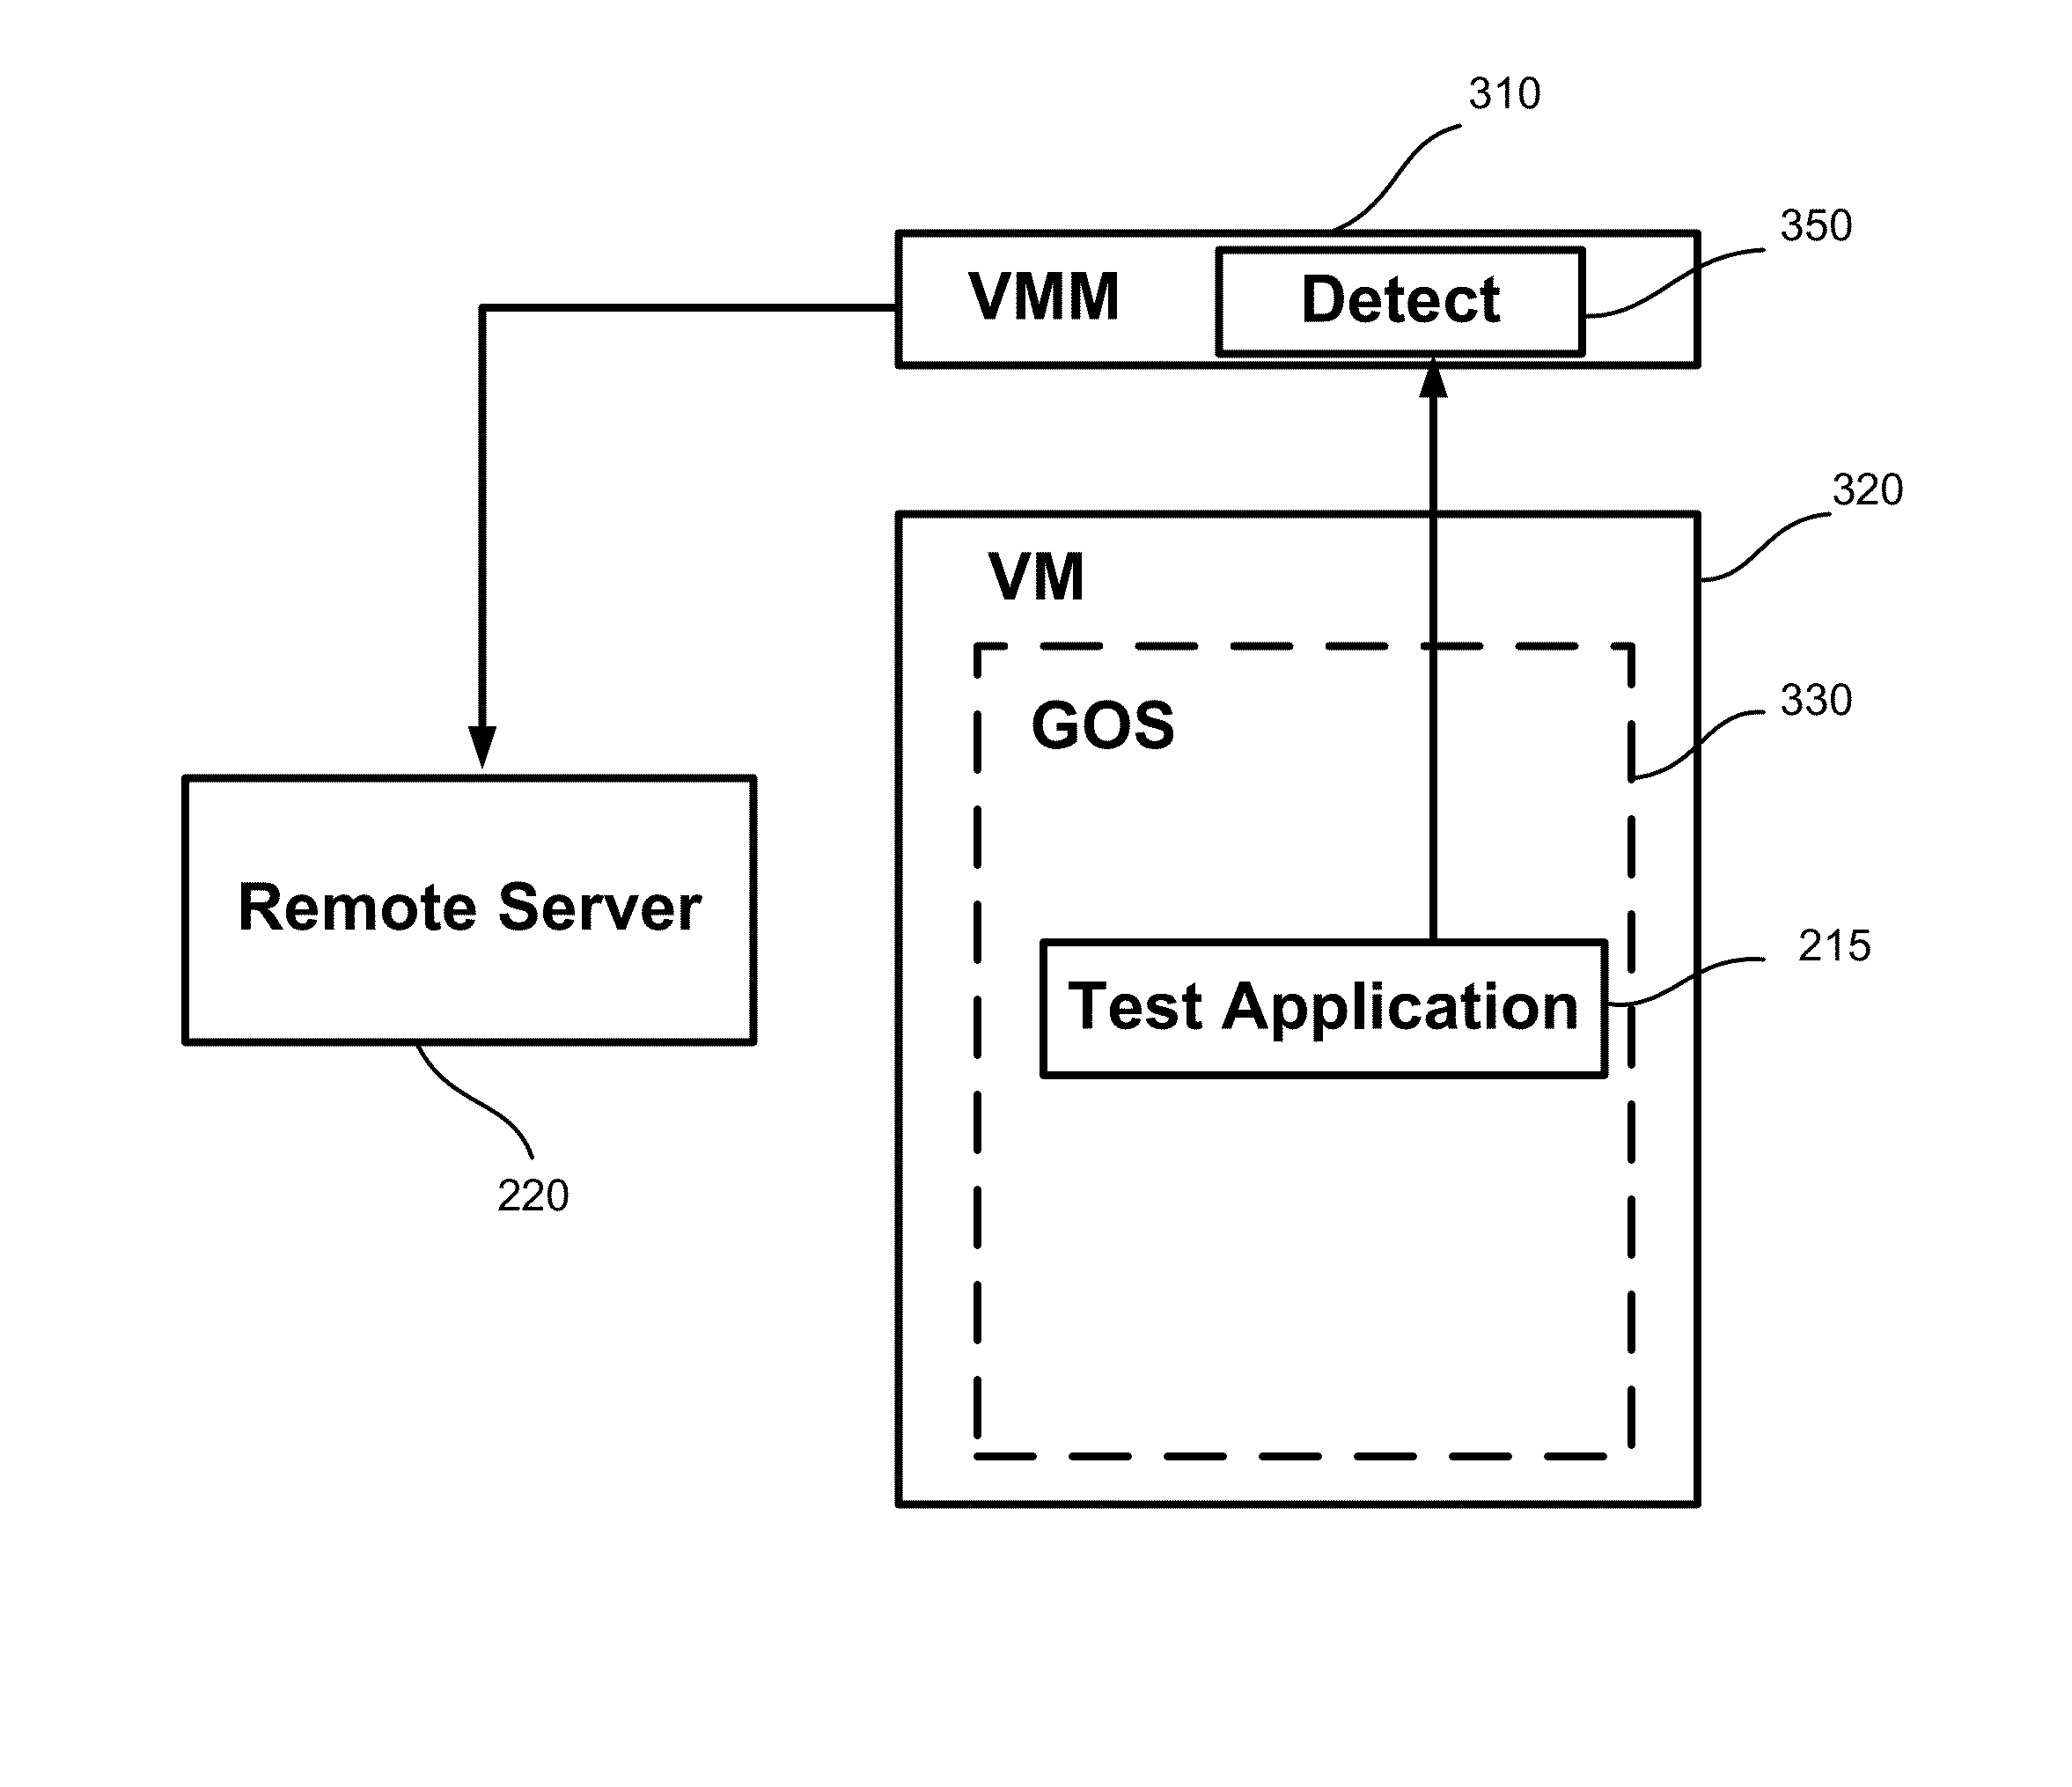 Virtual execution environment for software delivery and feedback